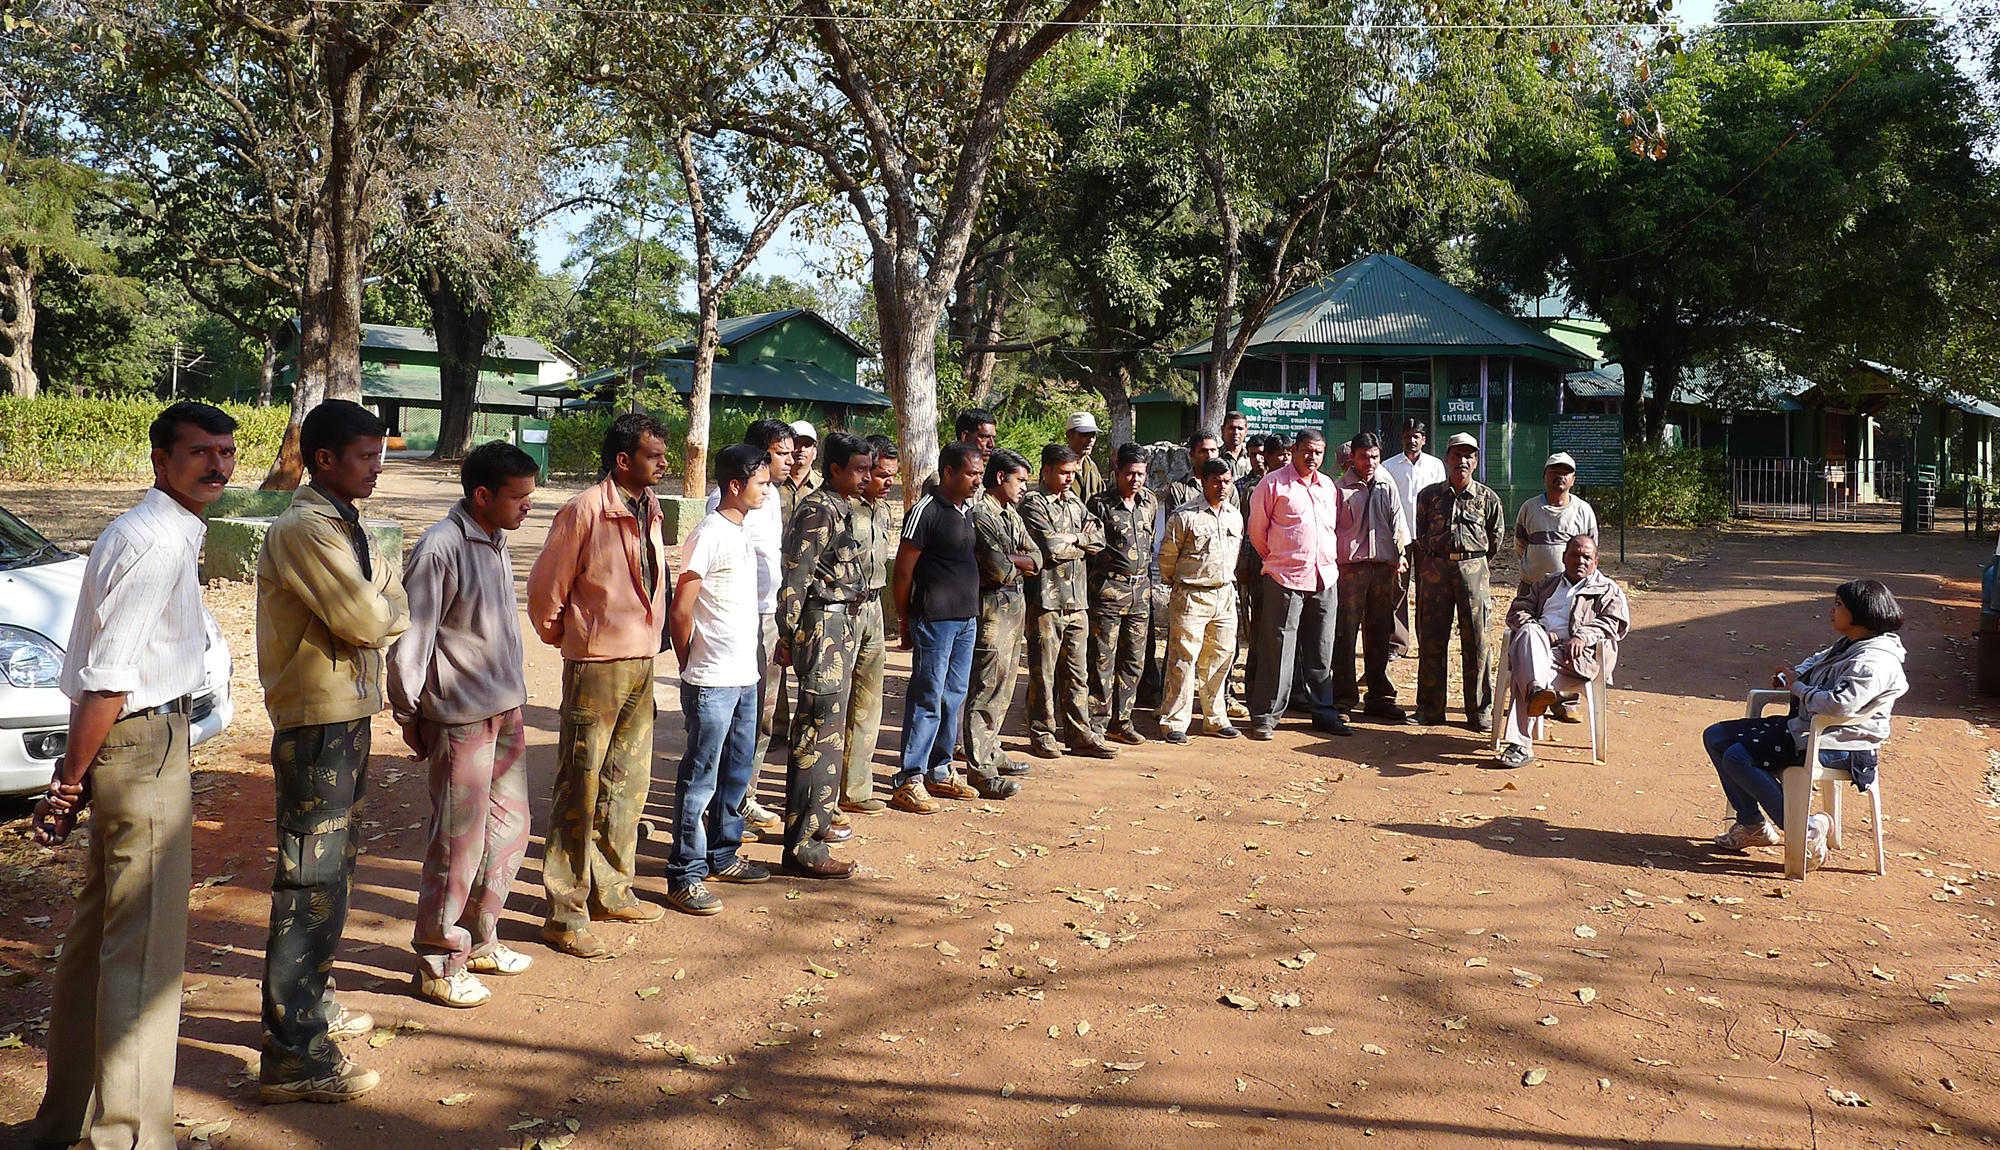 Meeting with forest guards & guides to save rock art